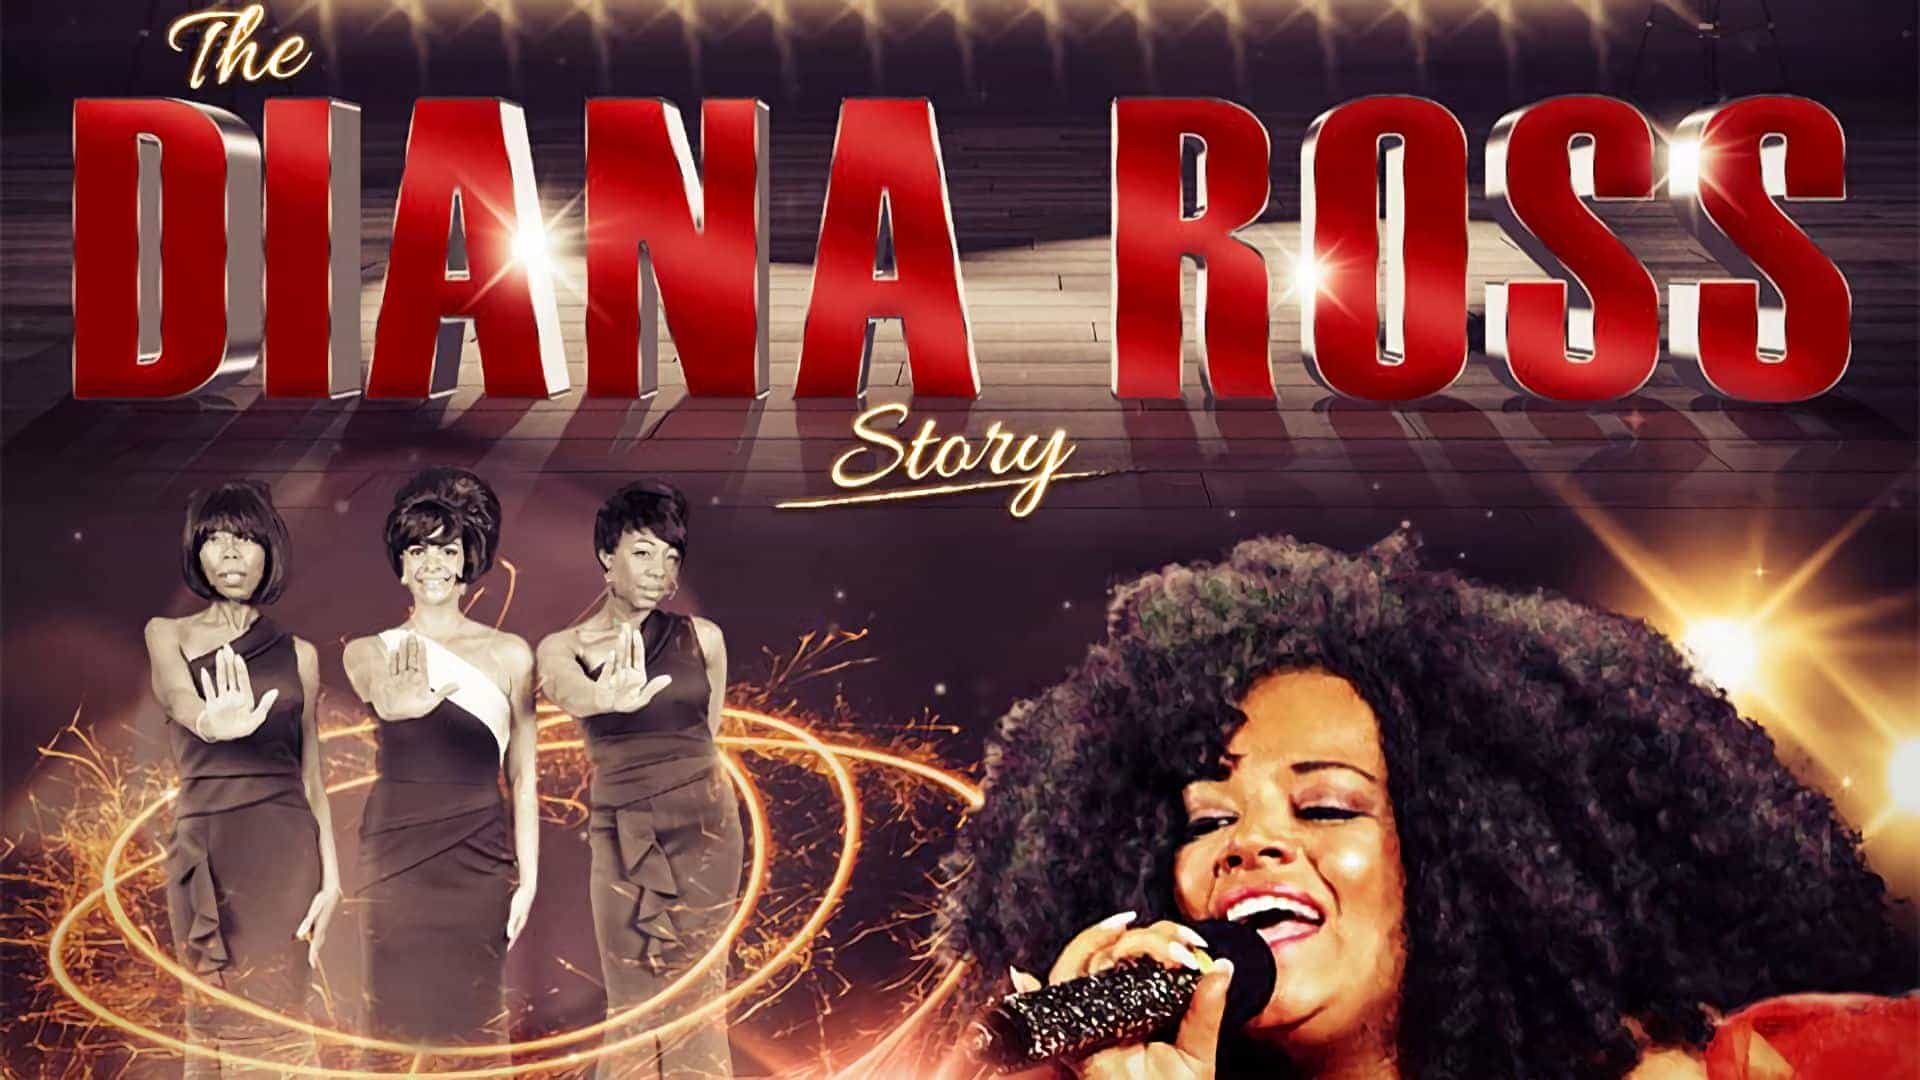 In The Name of Love - The Diana Ross Story